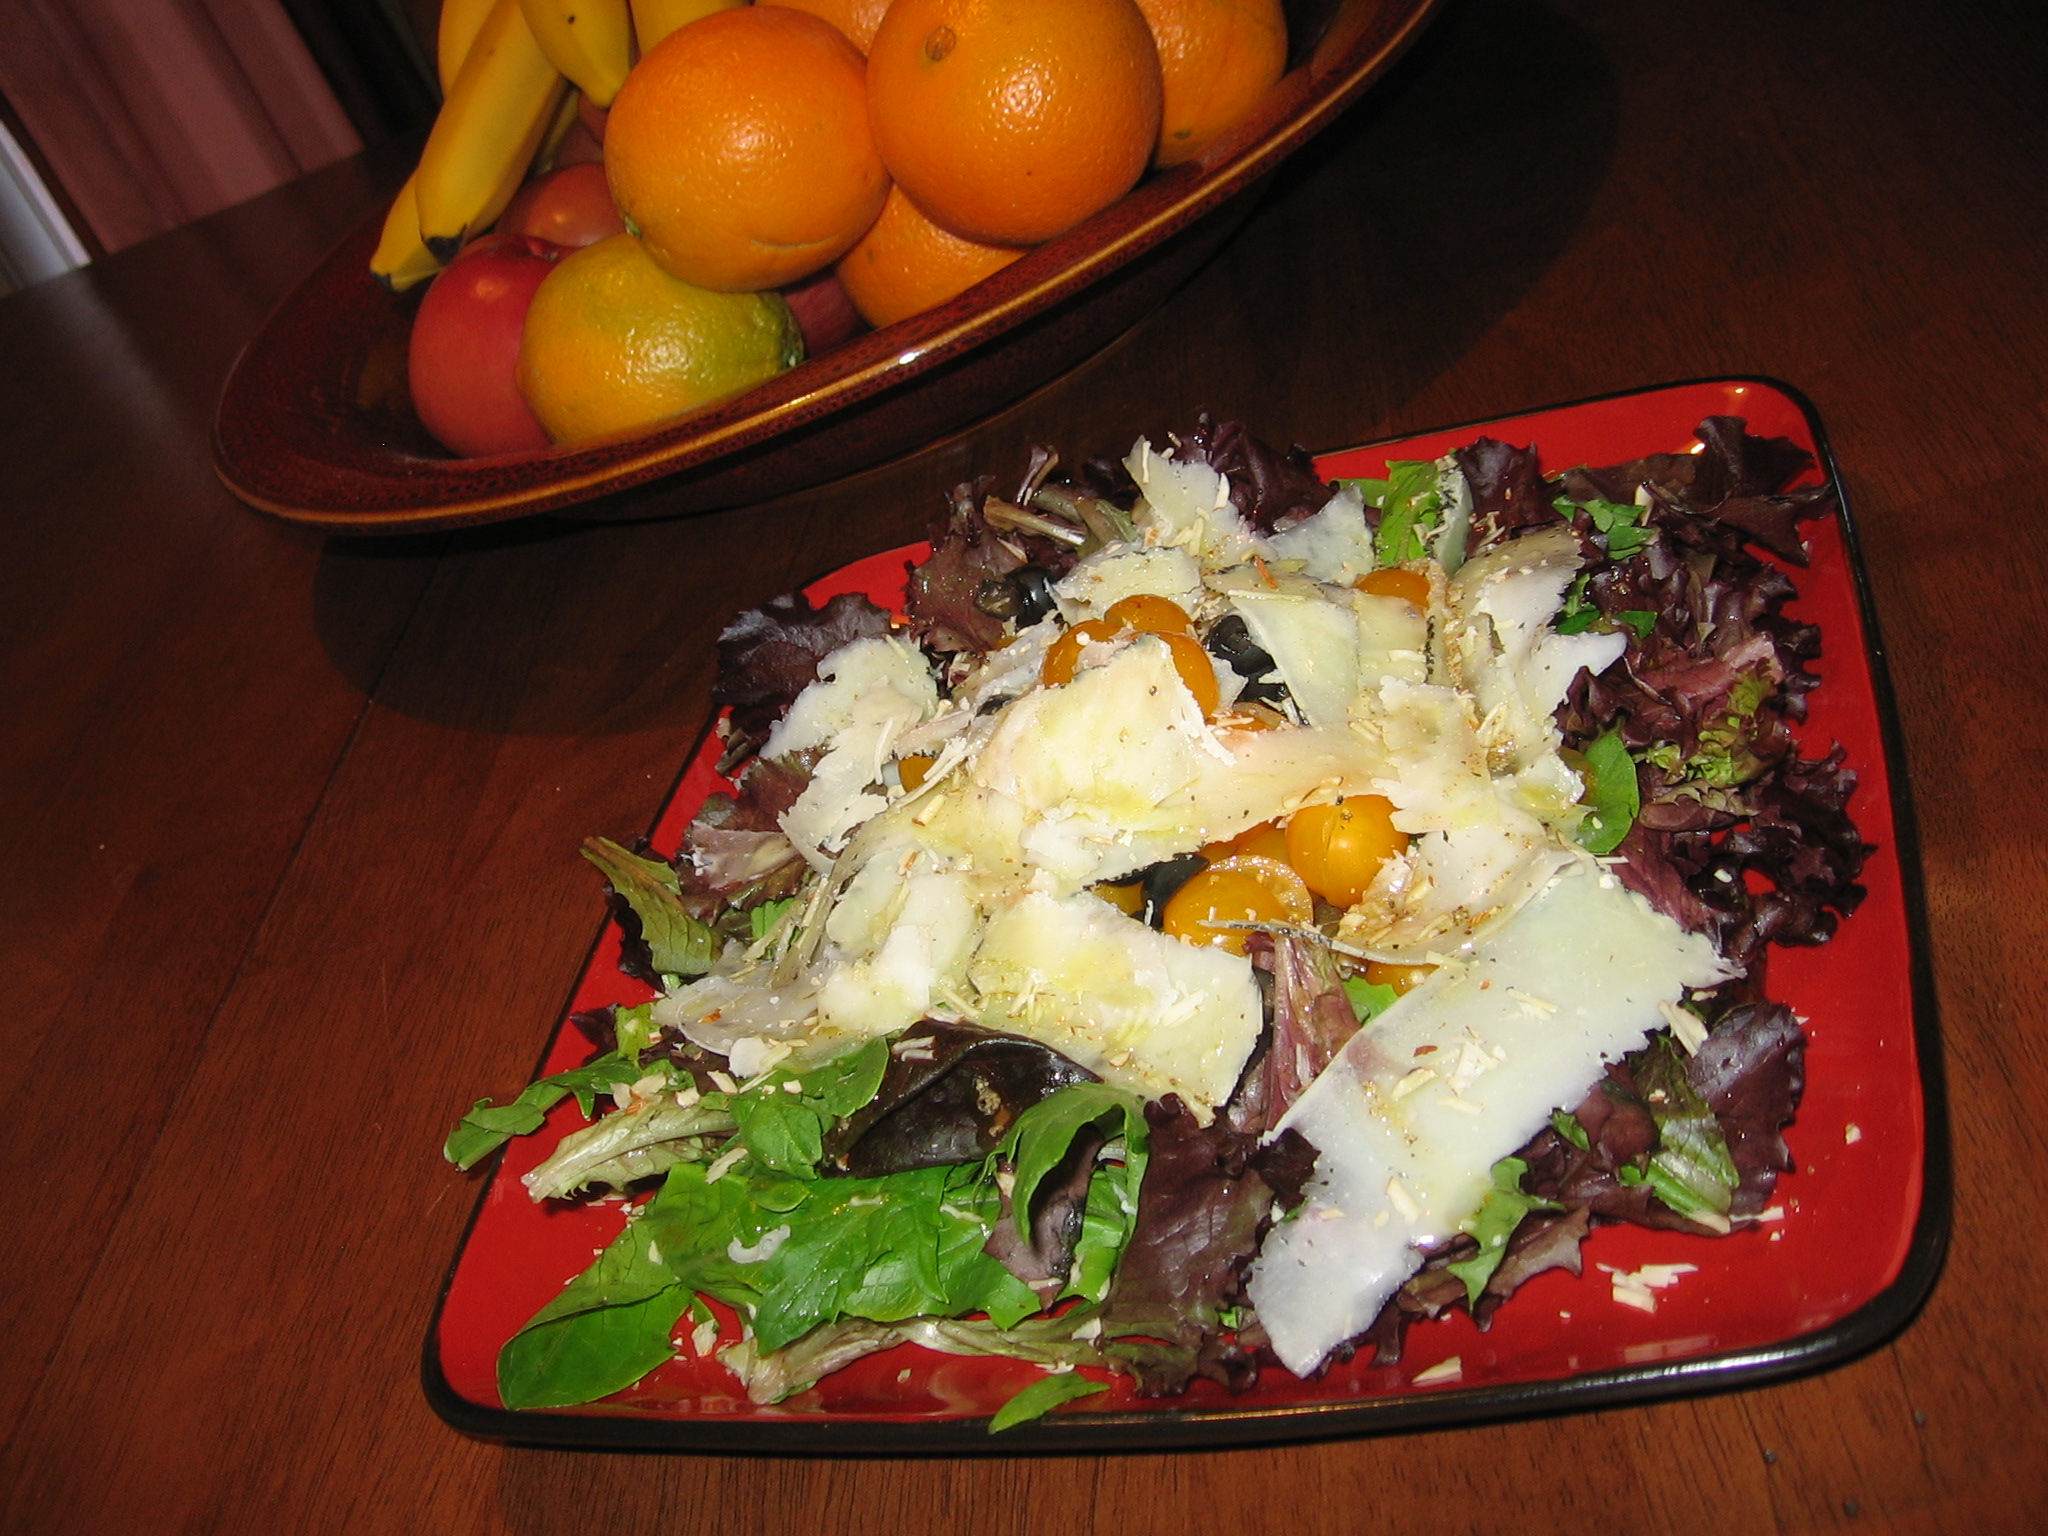 Andrea Beaman’s Arugula Salad with Shaved Manchego Cheese